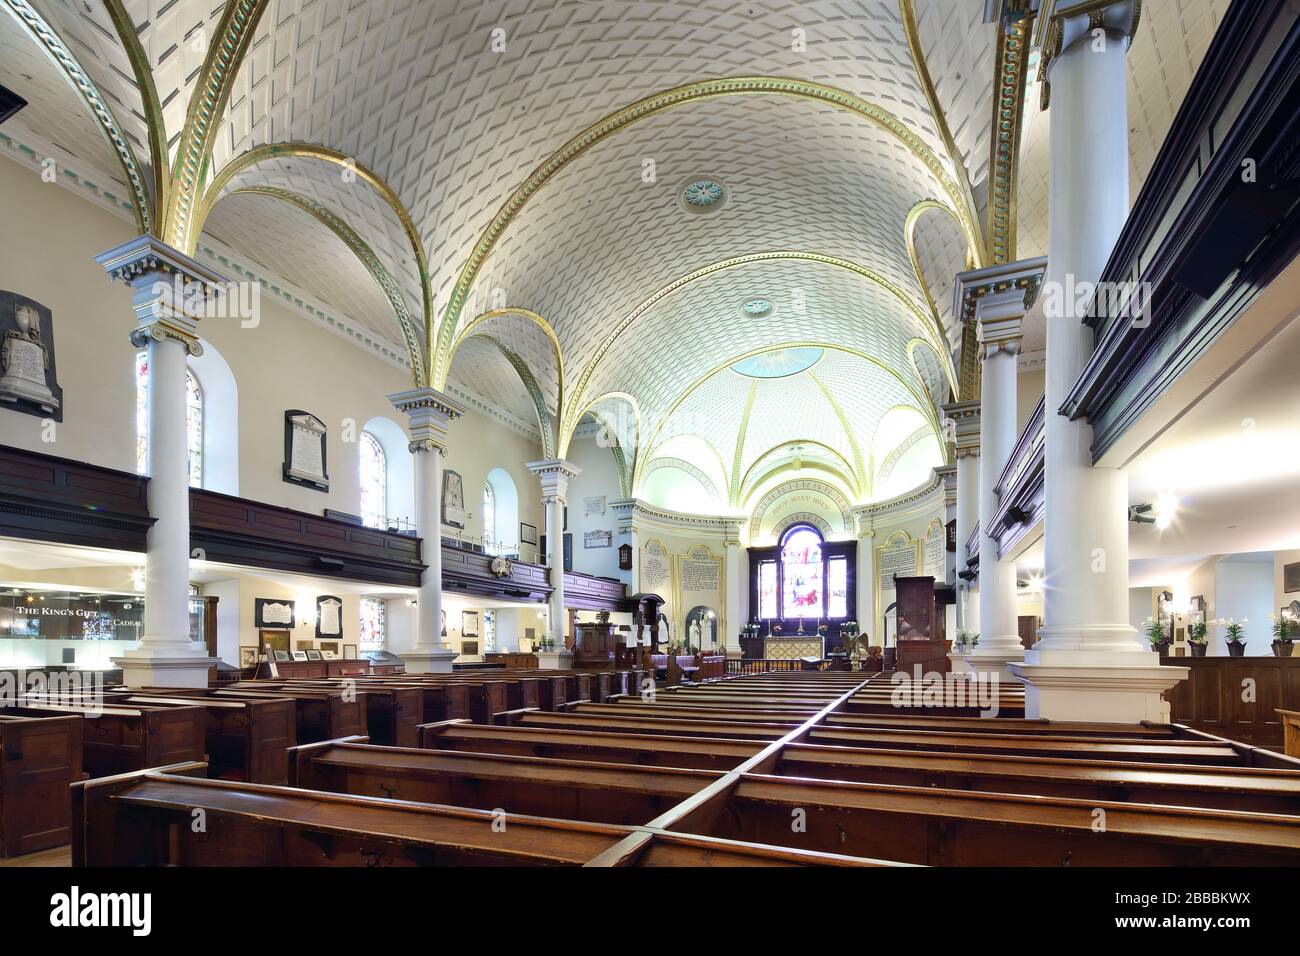 Nave and altar at the Cathedral of the Holy Trinity in Quebec City, Quebec, Canada Stock Photo